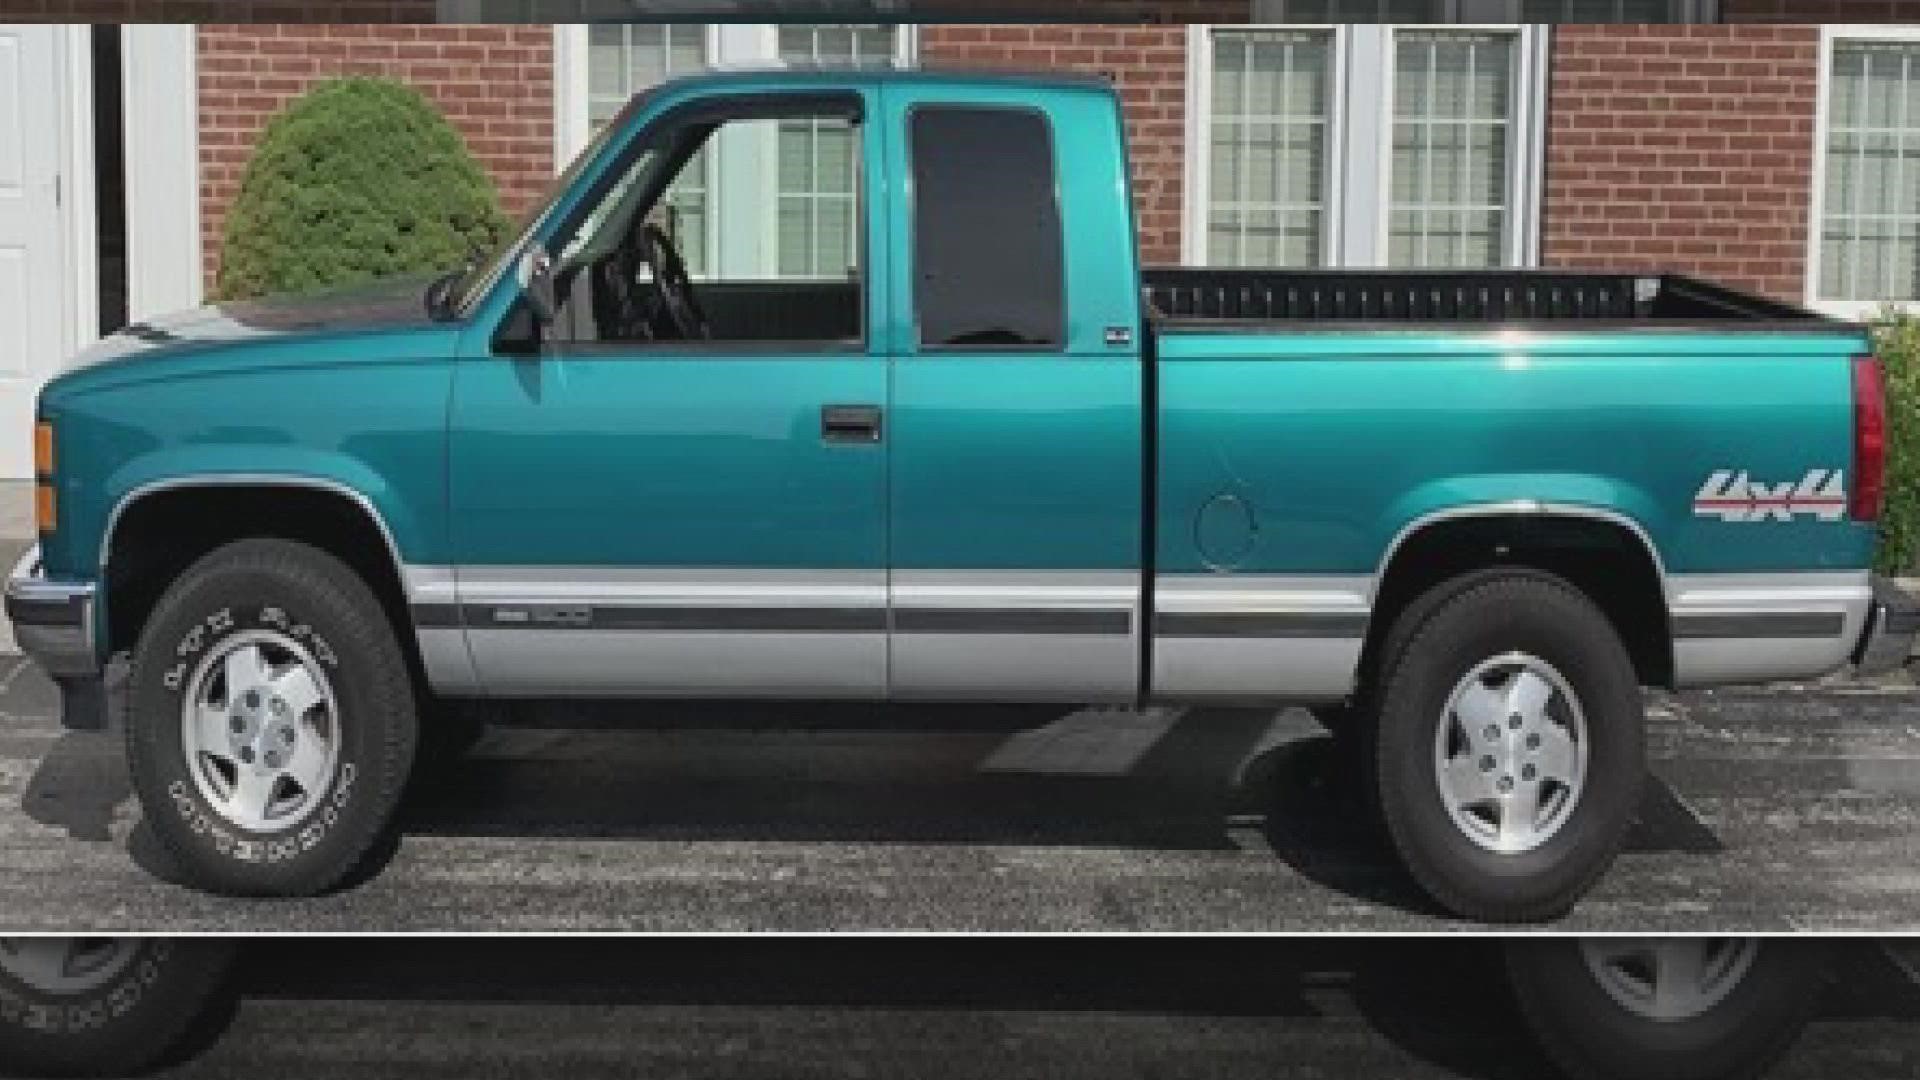 The suspect vehicle was described as a green 1990s model GMC Sierra, similar to the one pictured, Denver Police said.